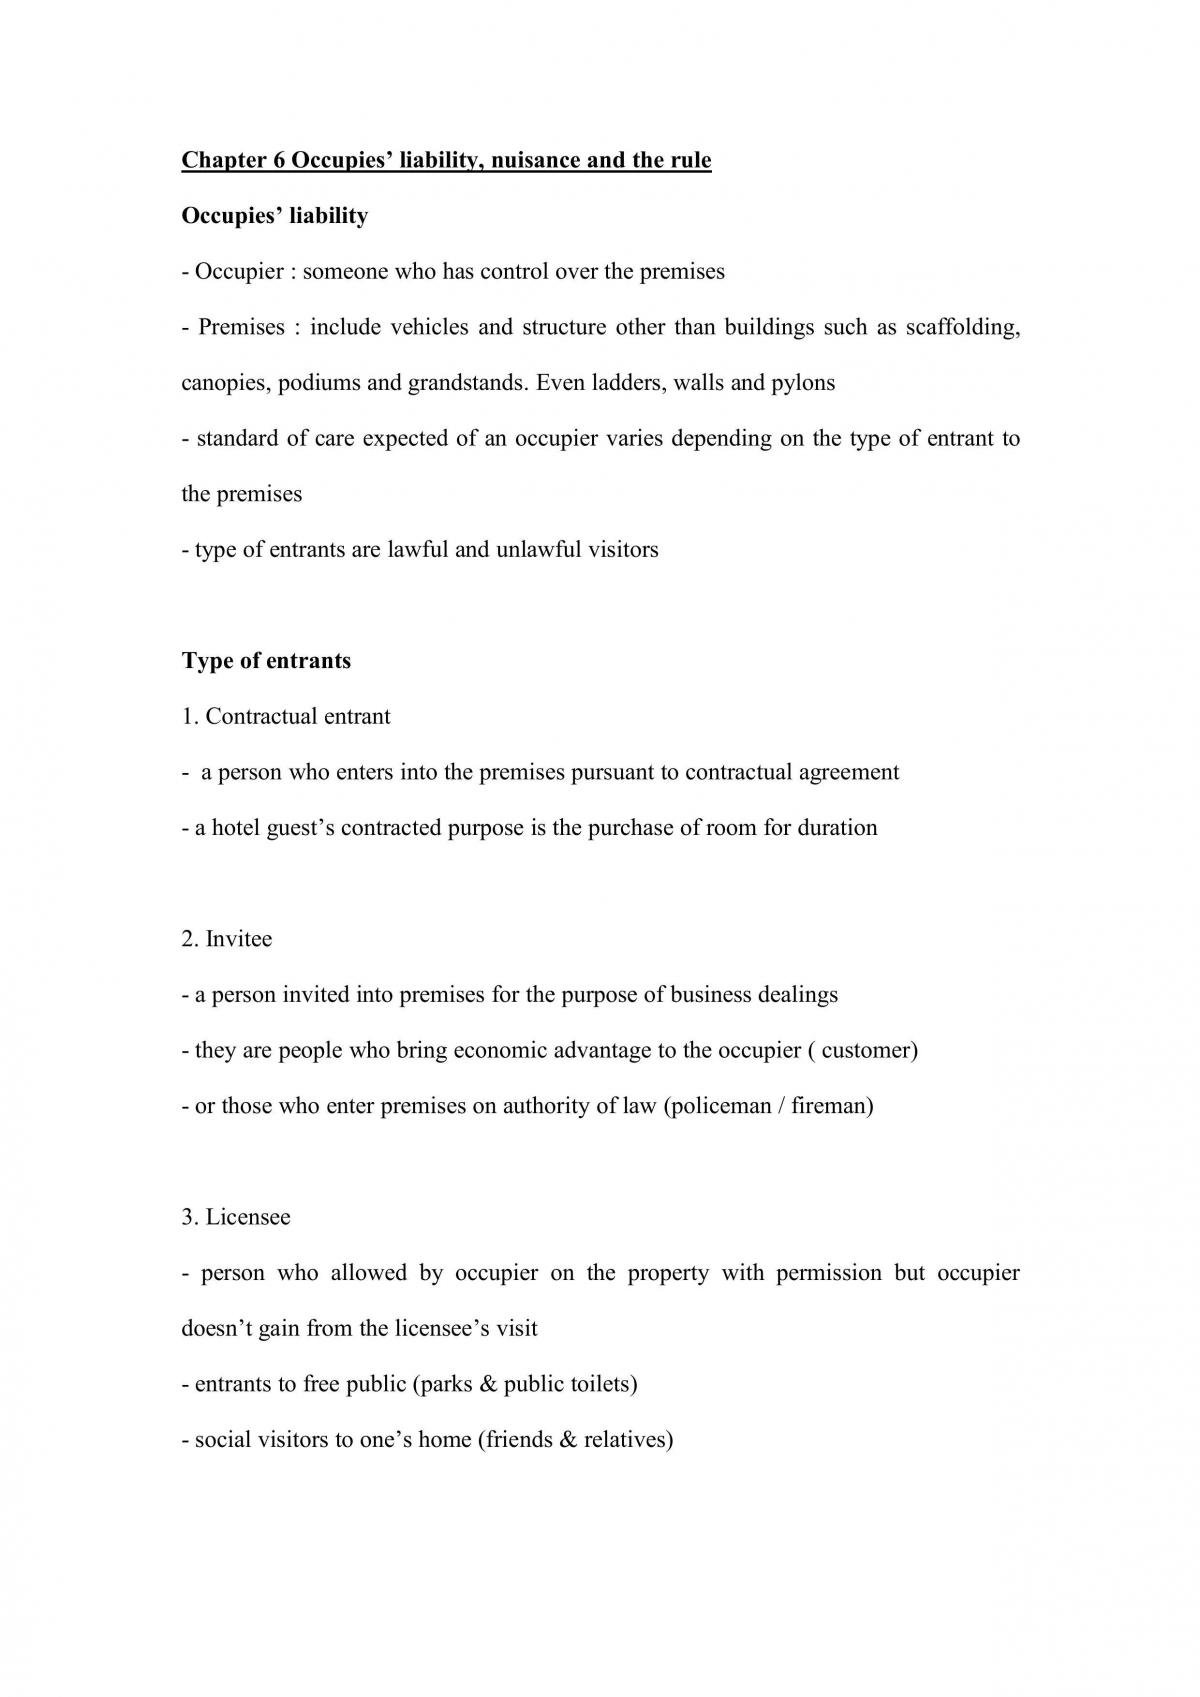 Hospitality Law - Page 13